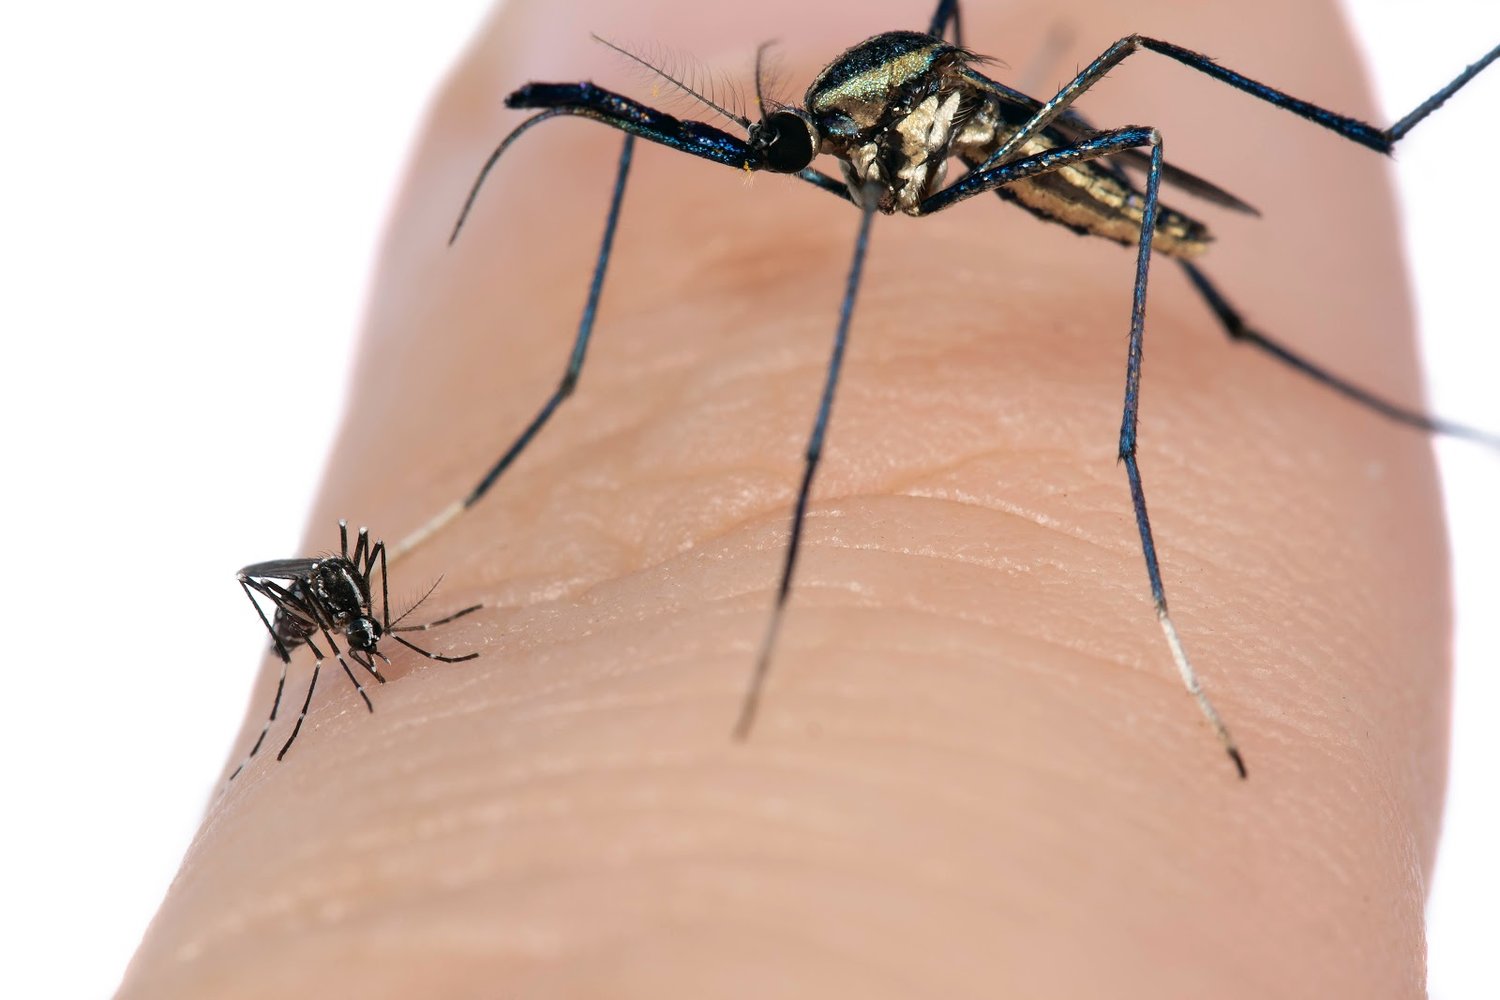 This photo shows a close-up image of an elephant mosquito and an Asian tiger mosquito on a finger.